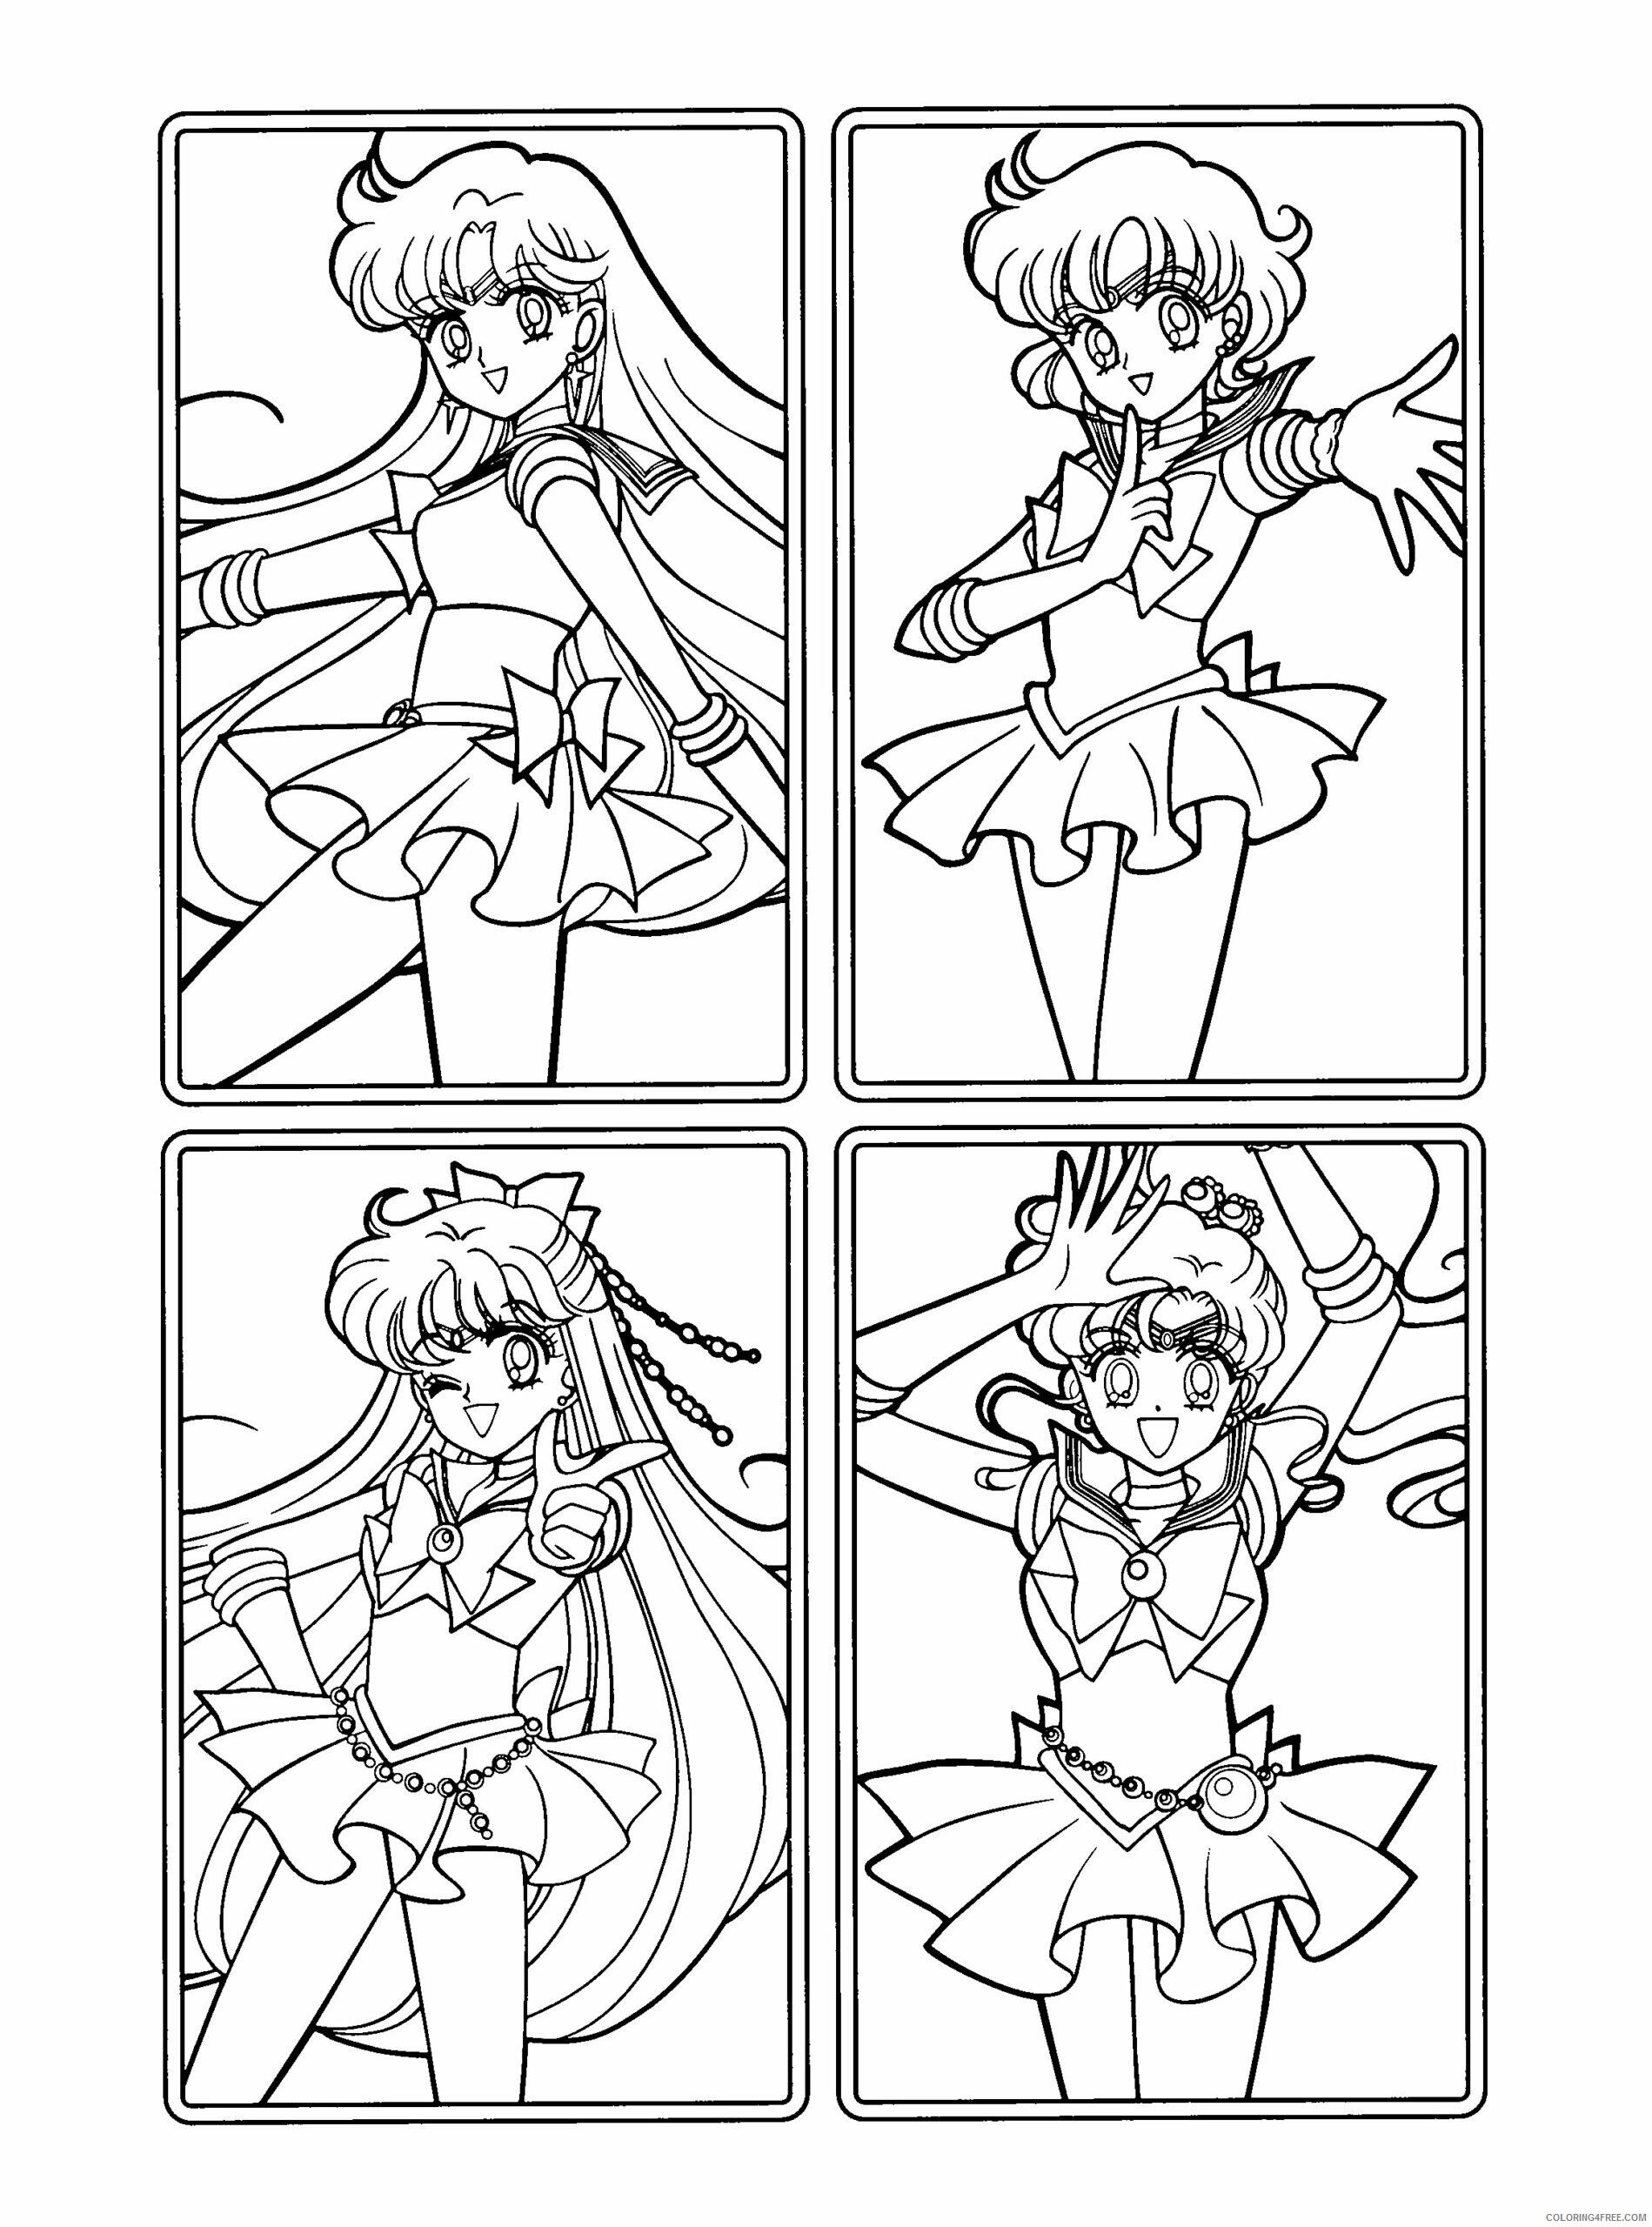 Sailor Moon Printable Coloring Pages Anime sailormoon 0nuSZ 2021 0981 Coloring4free